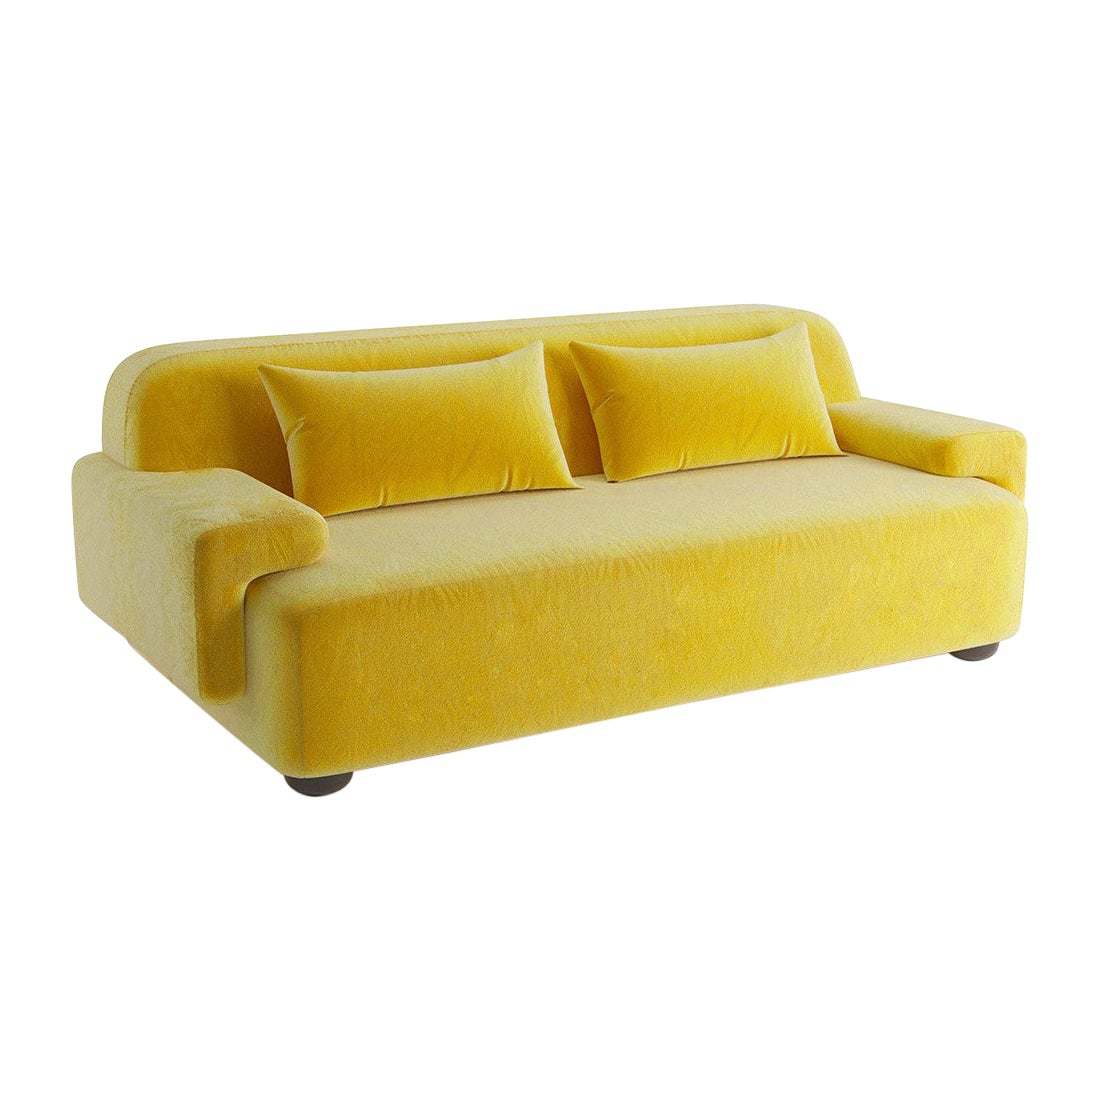 Popus Editions Lena 3 Seater Sofa in Yellow Verone Velvet Upholstery For Sale